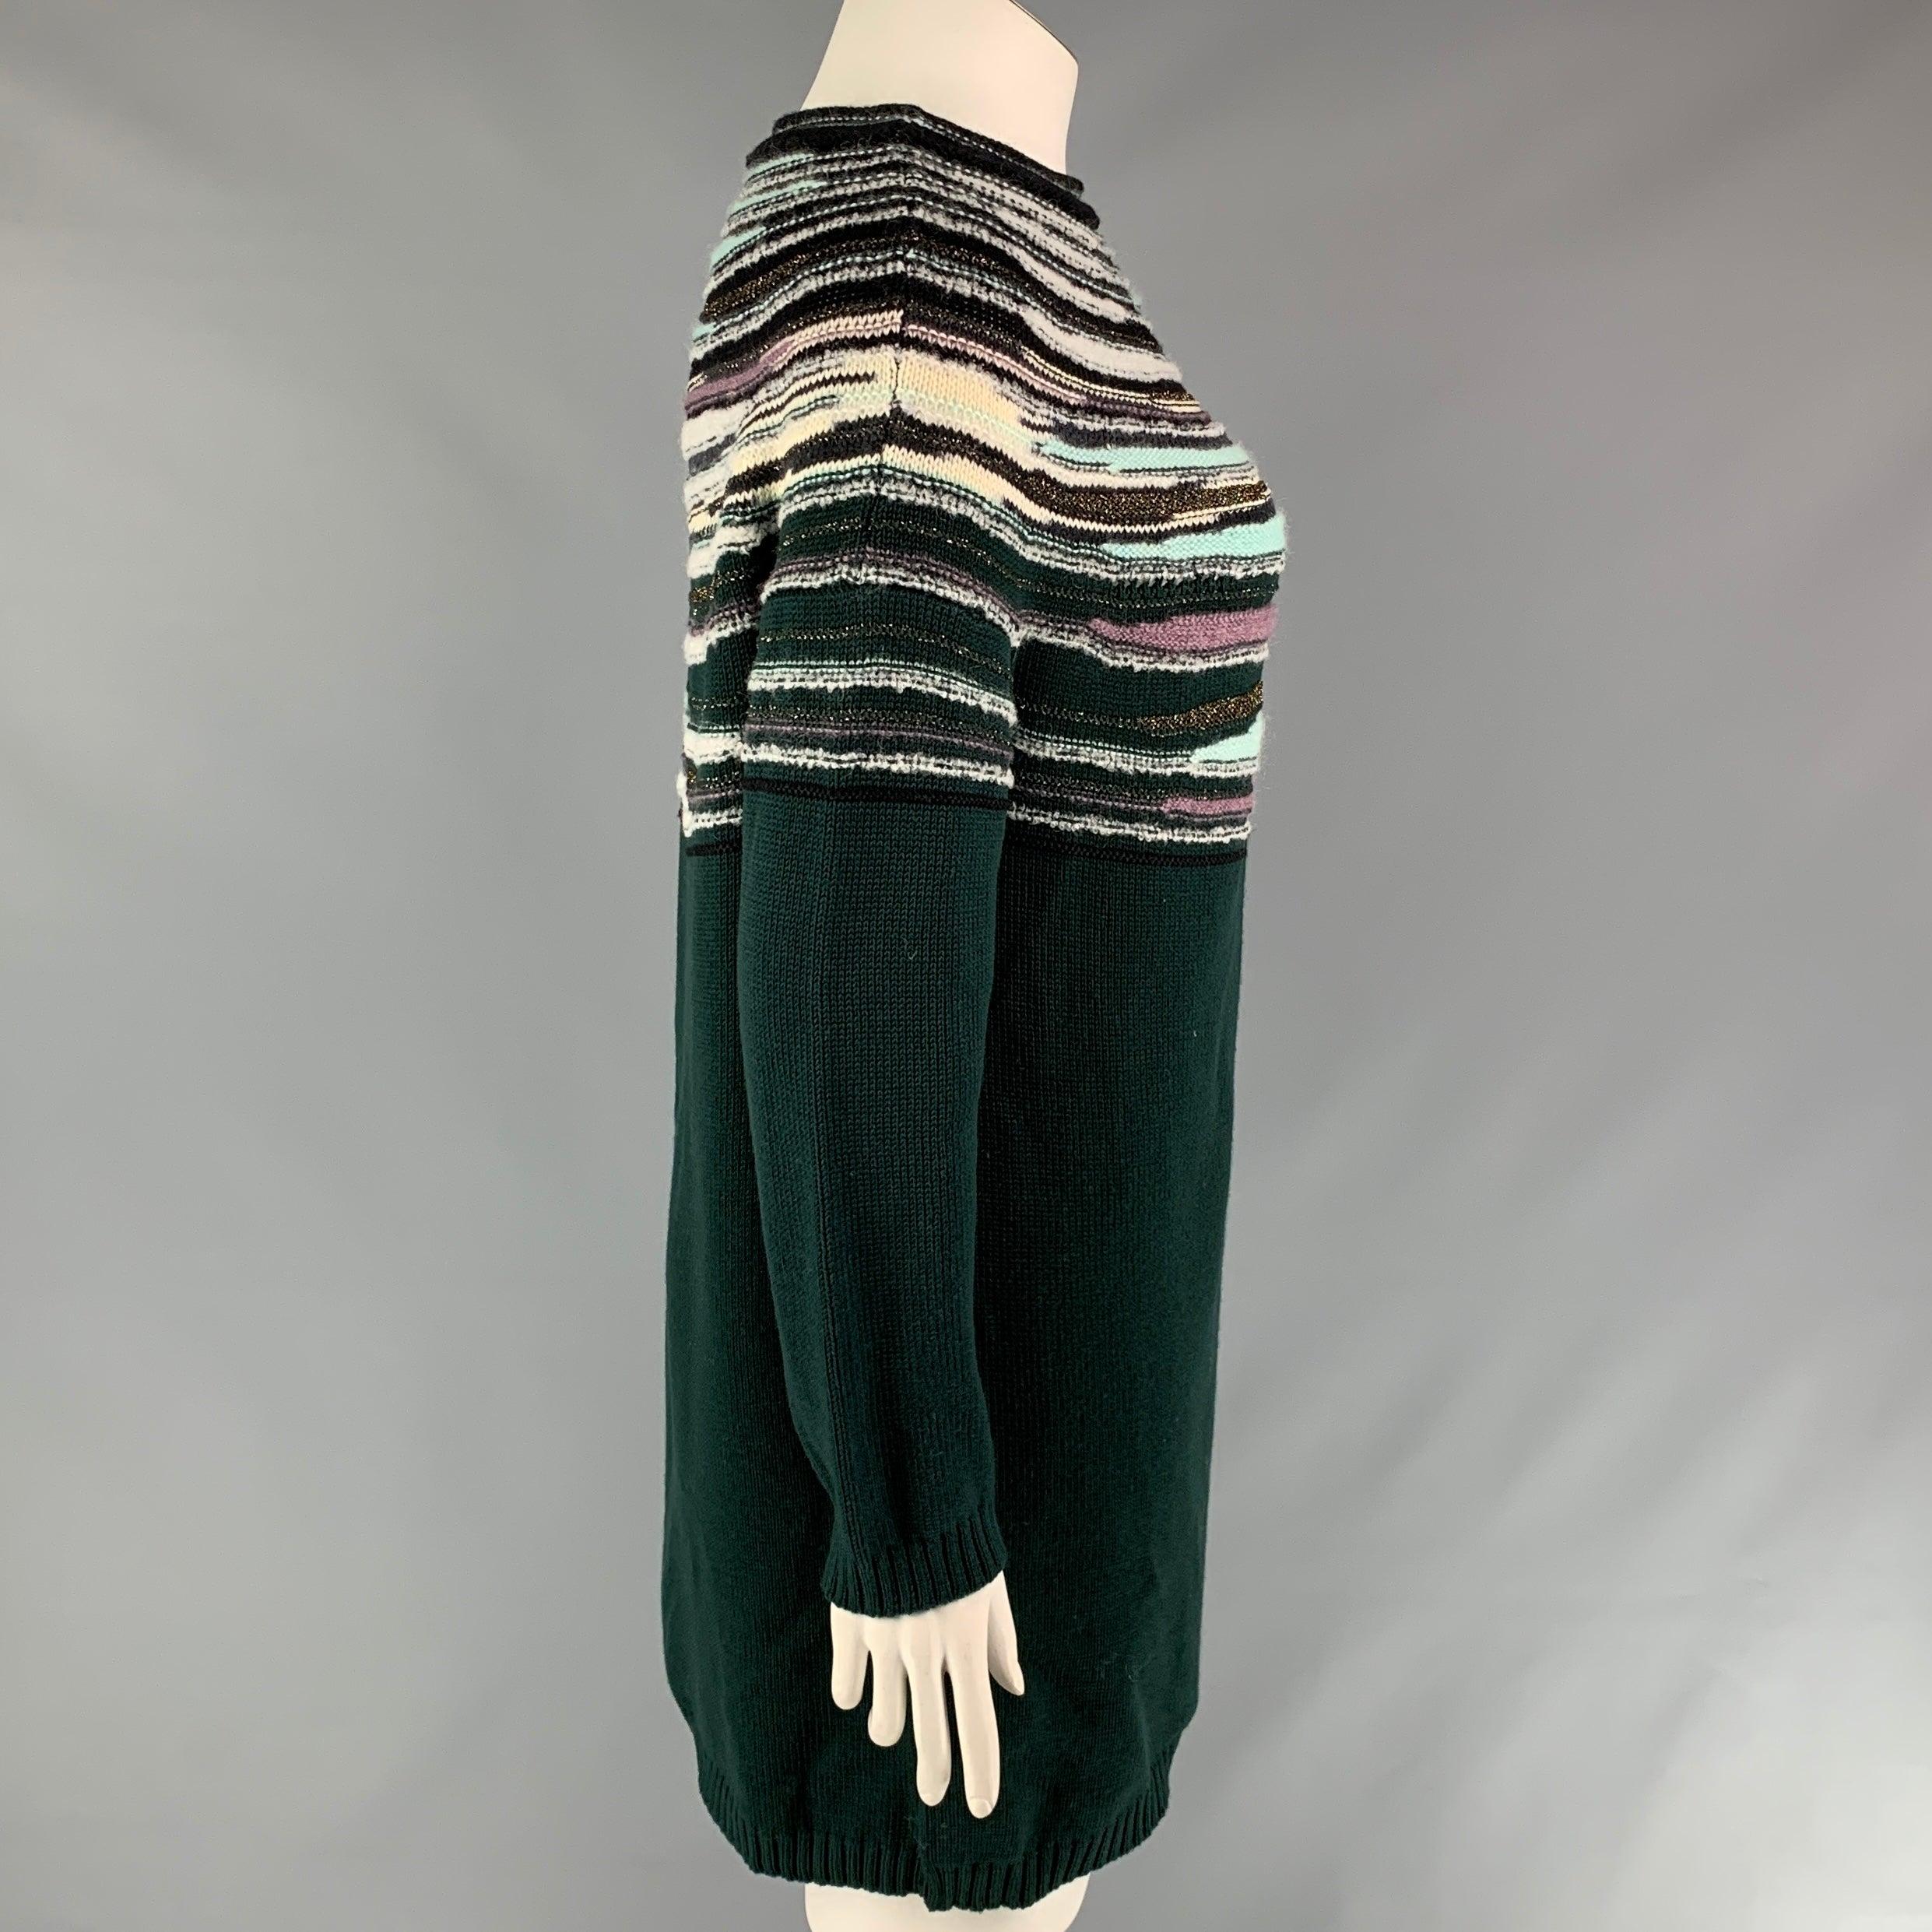 M MISSONI sweater comes in a multi-color knitted wool featuring long sleeves and a crew-neck. Made in Italy. Very Good
Pre-Owned Condition. 

Marked:   I 48 / D CH 42 / A NL 42 / EFB 44 / GB 16 / USA 12 

Measurements: 
 
Shoulder: 24 inches  Bust: